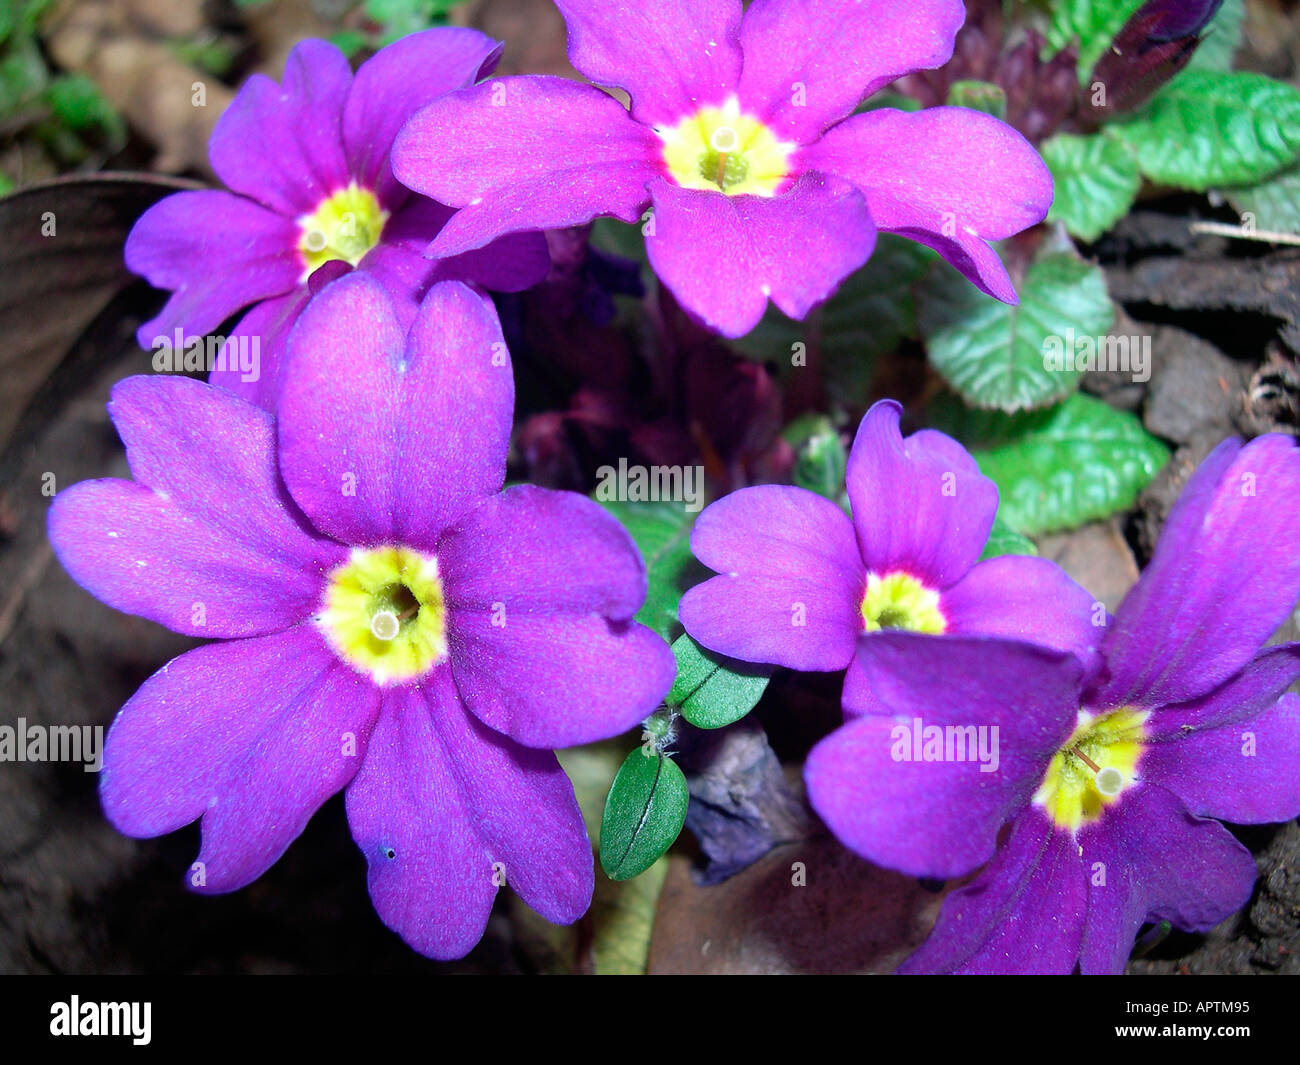 a purple primula plant growing in a garden Stock Photo